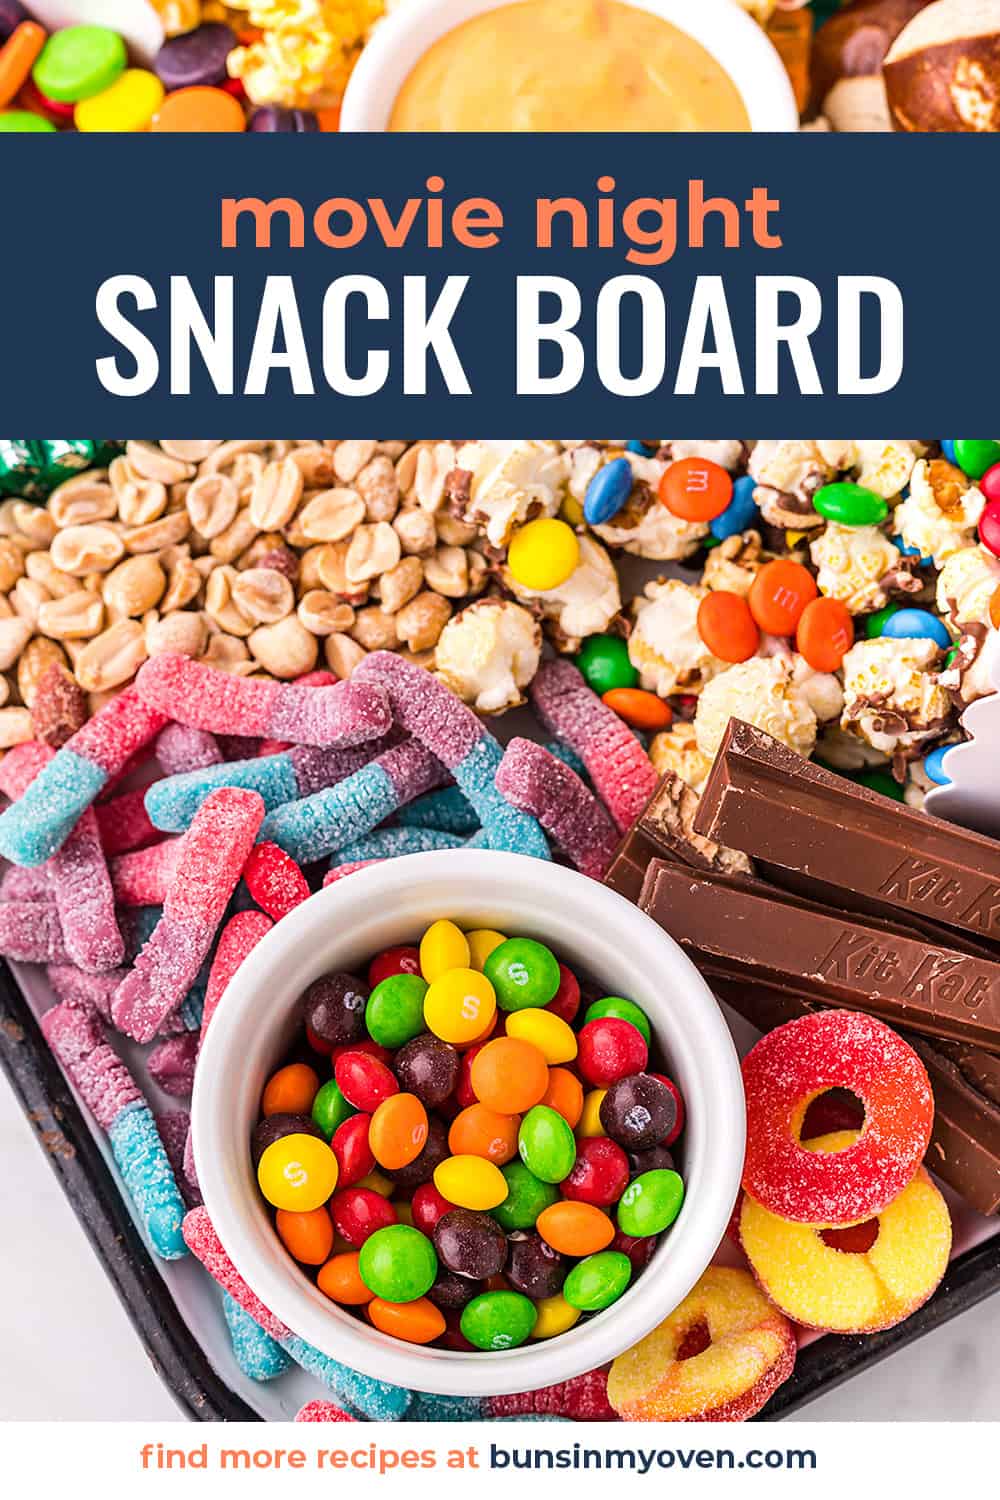 movie night snack board with text for Pinterest.